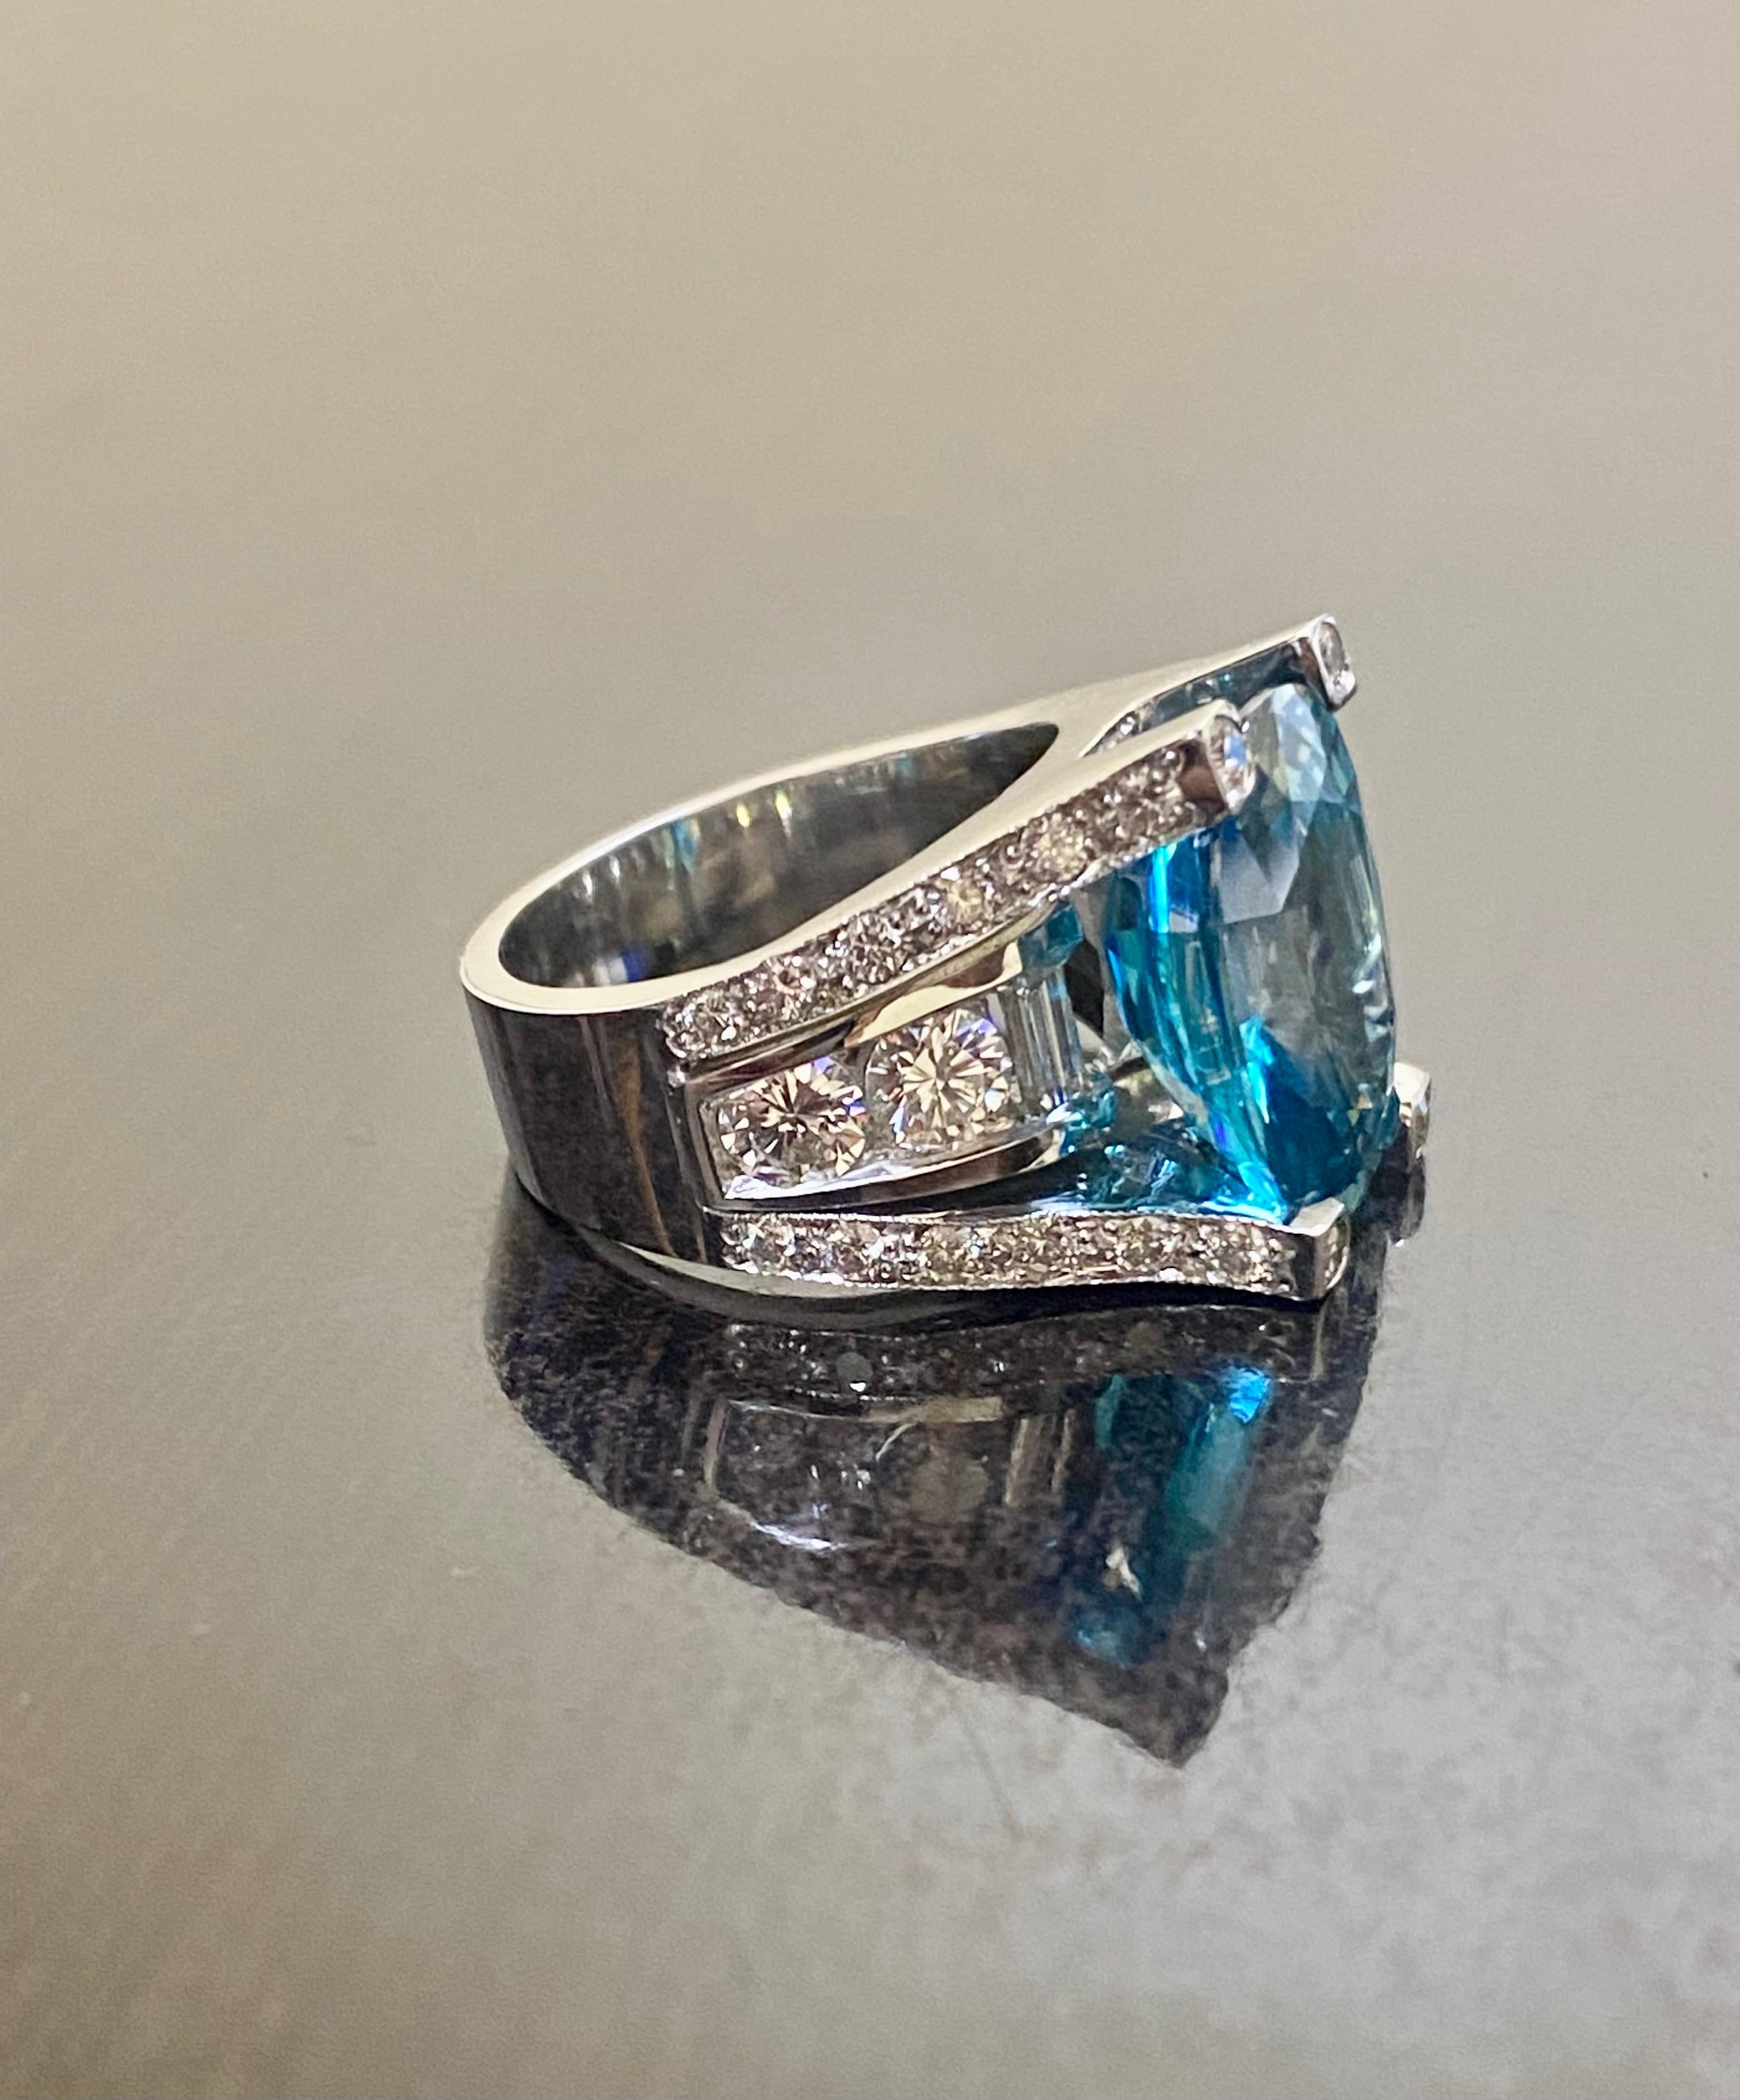 DeKara Designs Collection

Modern Inspired Extremely Vibrant Blue Zircon Diamond Engagement Ring.

Metal- 18K White Gold, .750.

Stones- Genuine Oval Blue Zircon 14 Carats, 36 Round Diamonds G-I Color VS2-SI1 Clarity, 2 Baguette Diamonds G-H Color